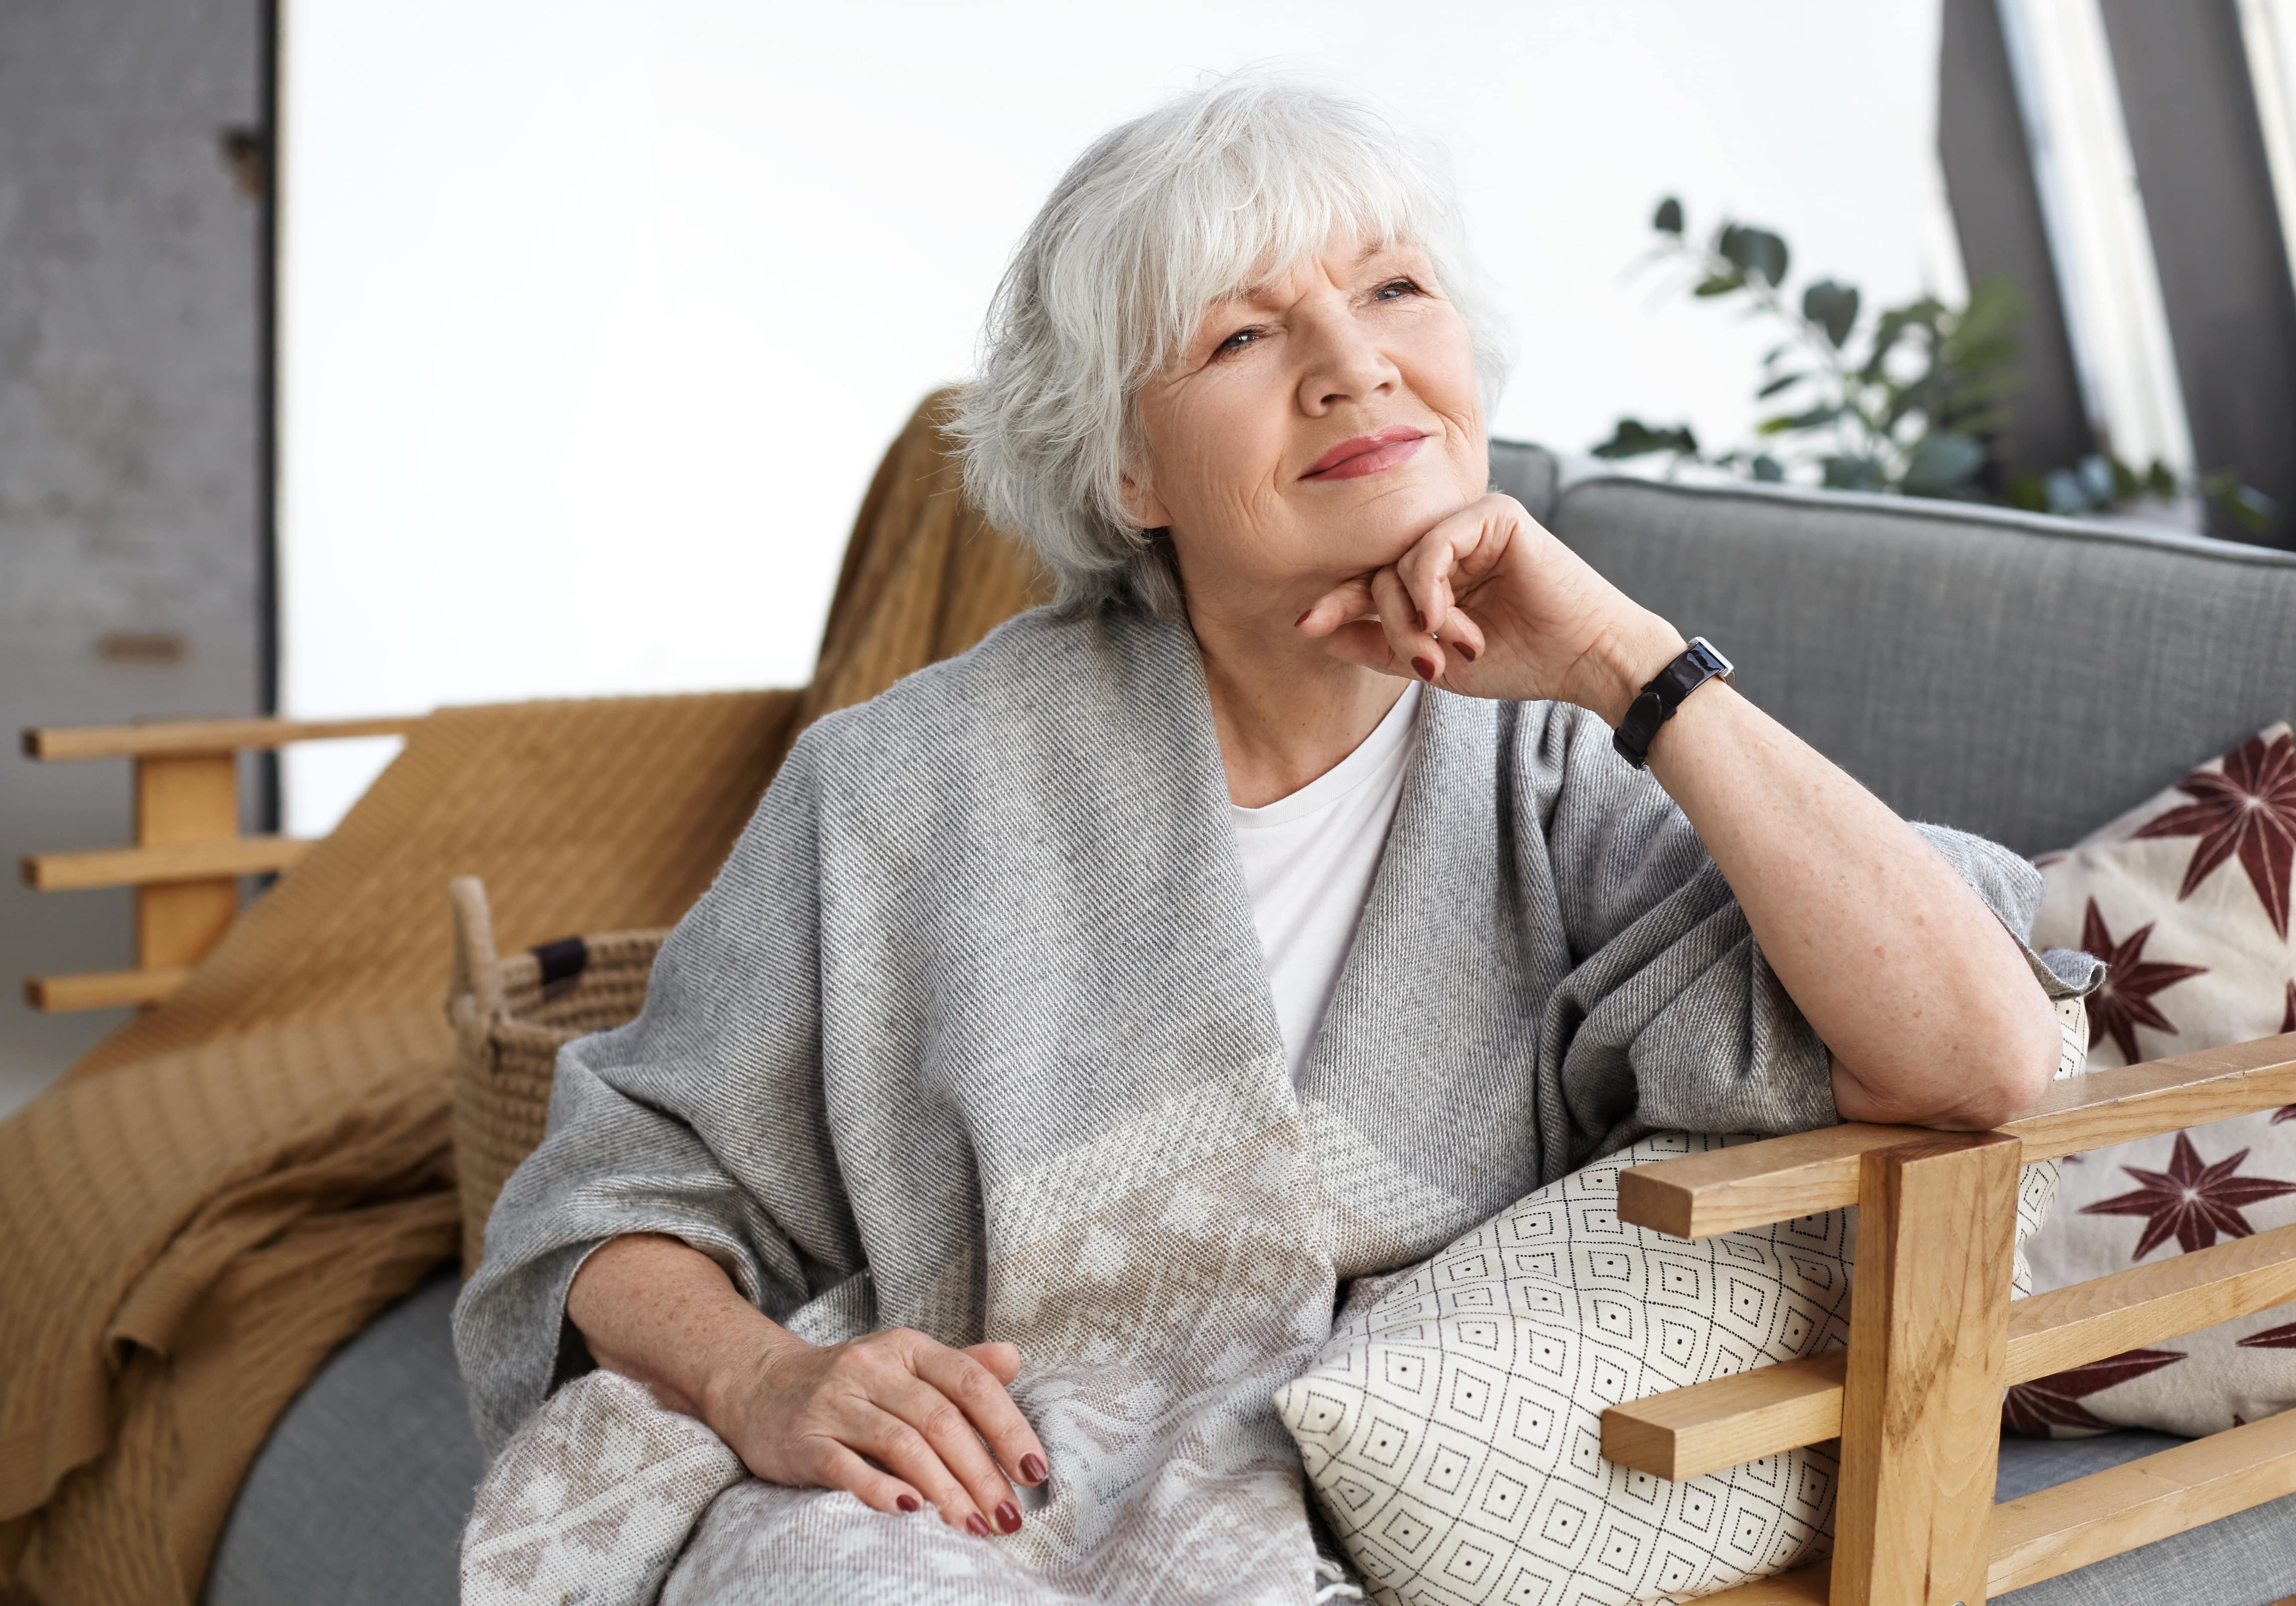 portrait-lovely-middle-aged-grey-haired-european-woman-with-dreamy-smile-eyes-full-wisdom-relaxing-home-alone-sitting-comfortable-couch-reminiscing-about-days-her-youth-min